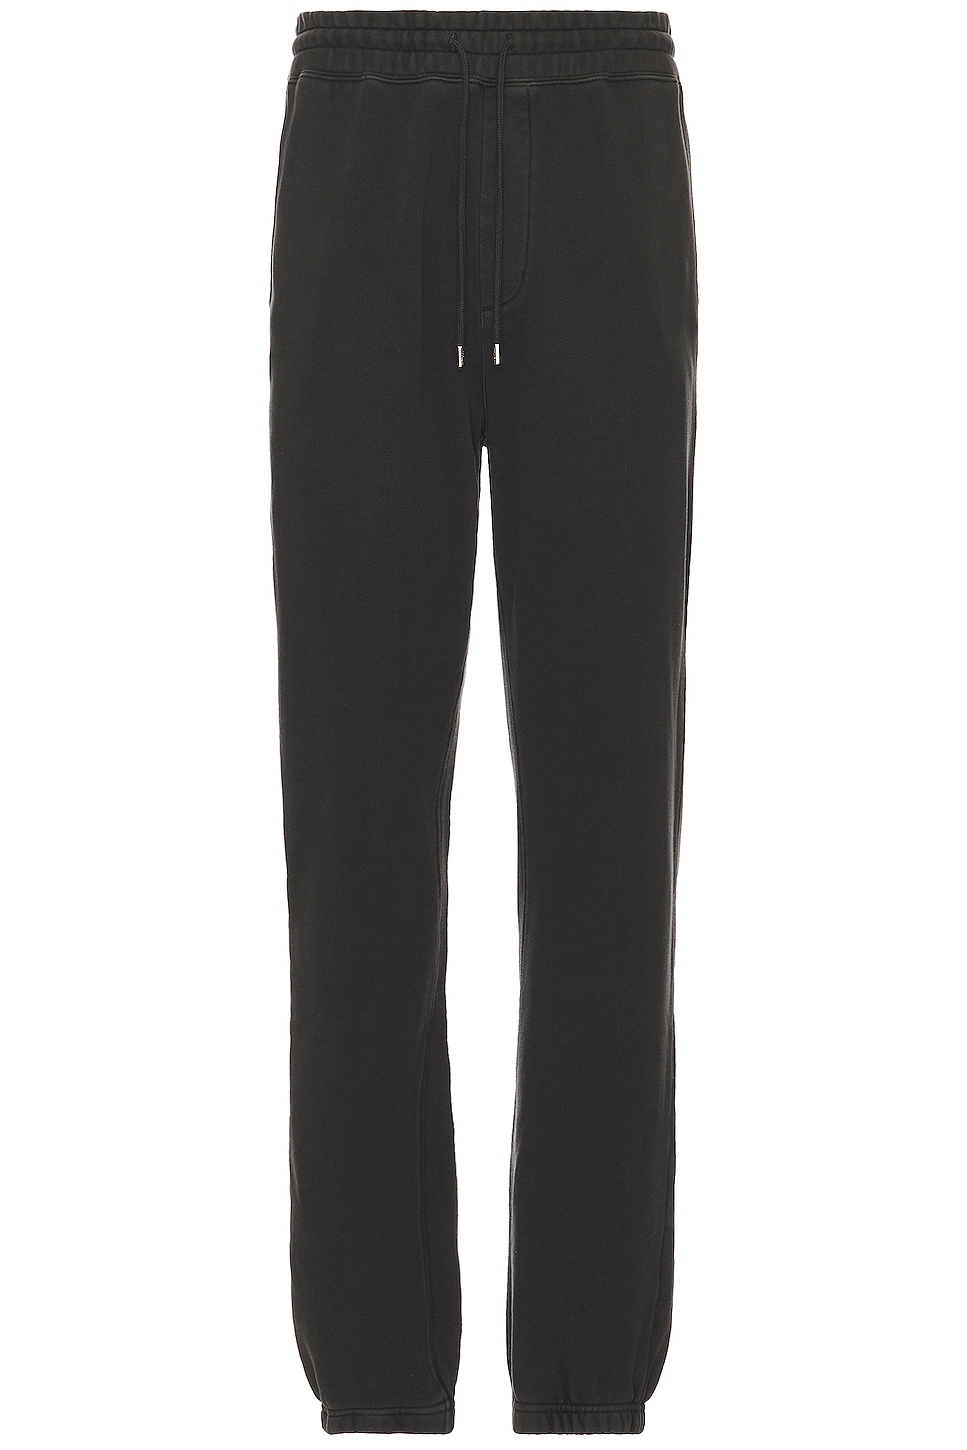 Image 1 of WAO The Fleece Jogger in black